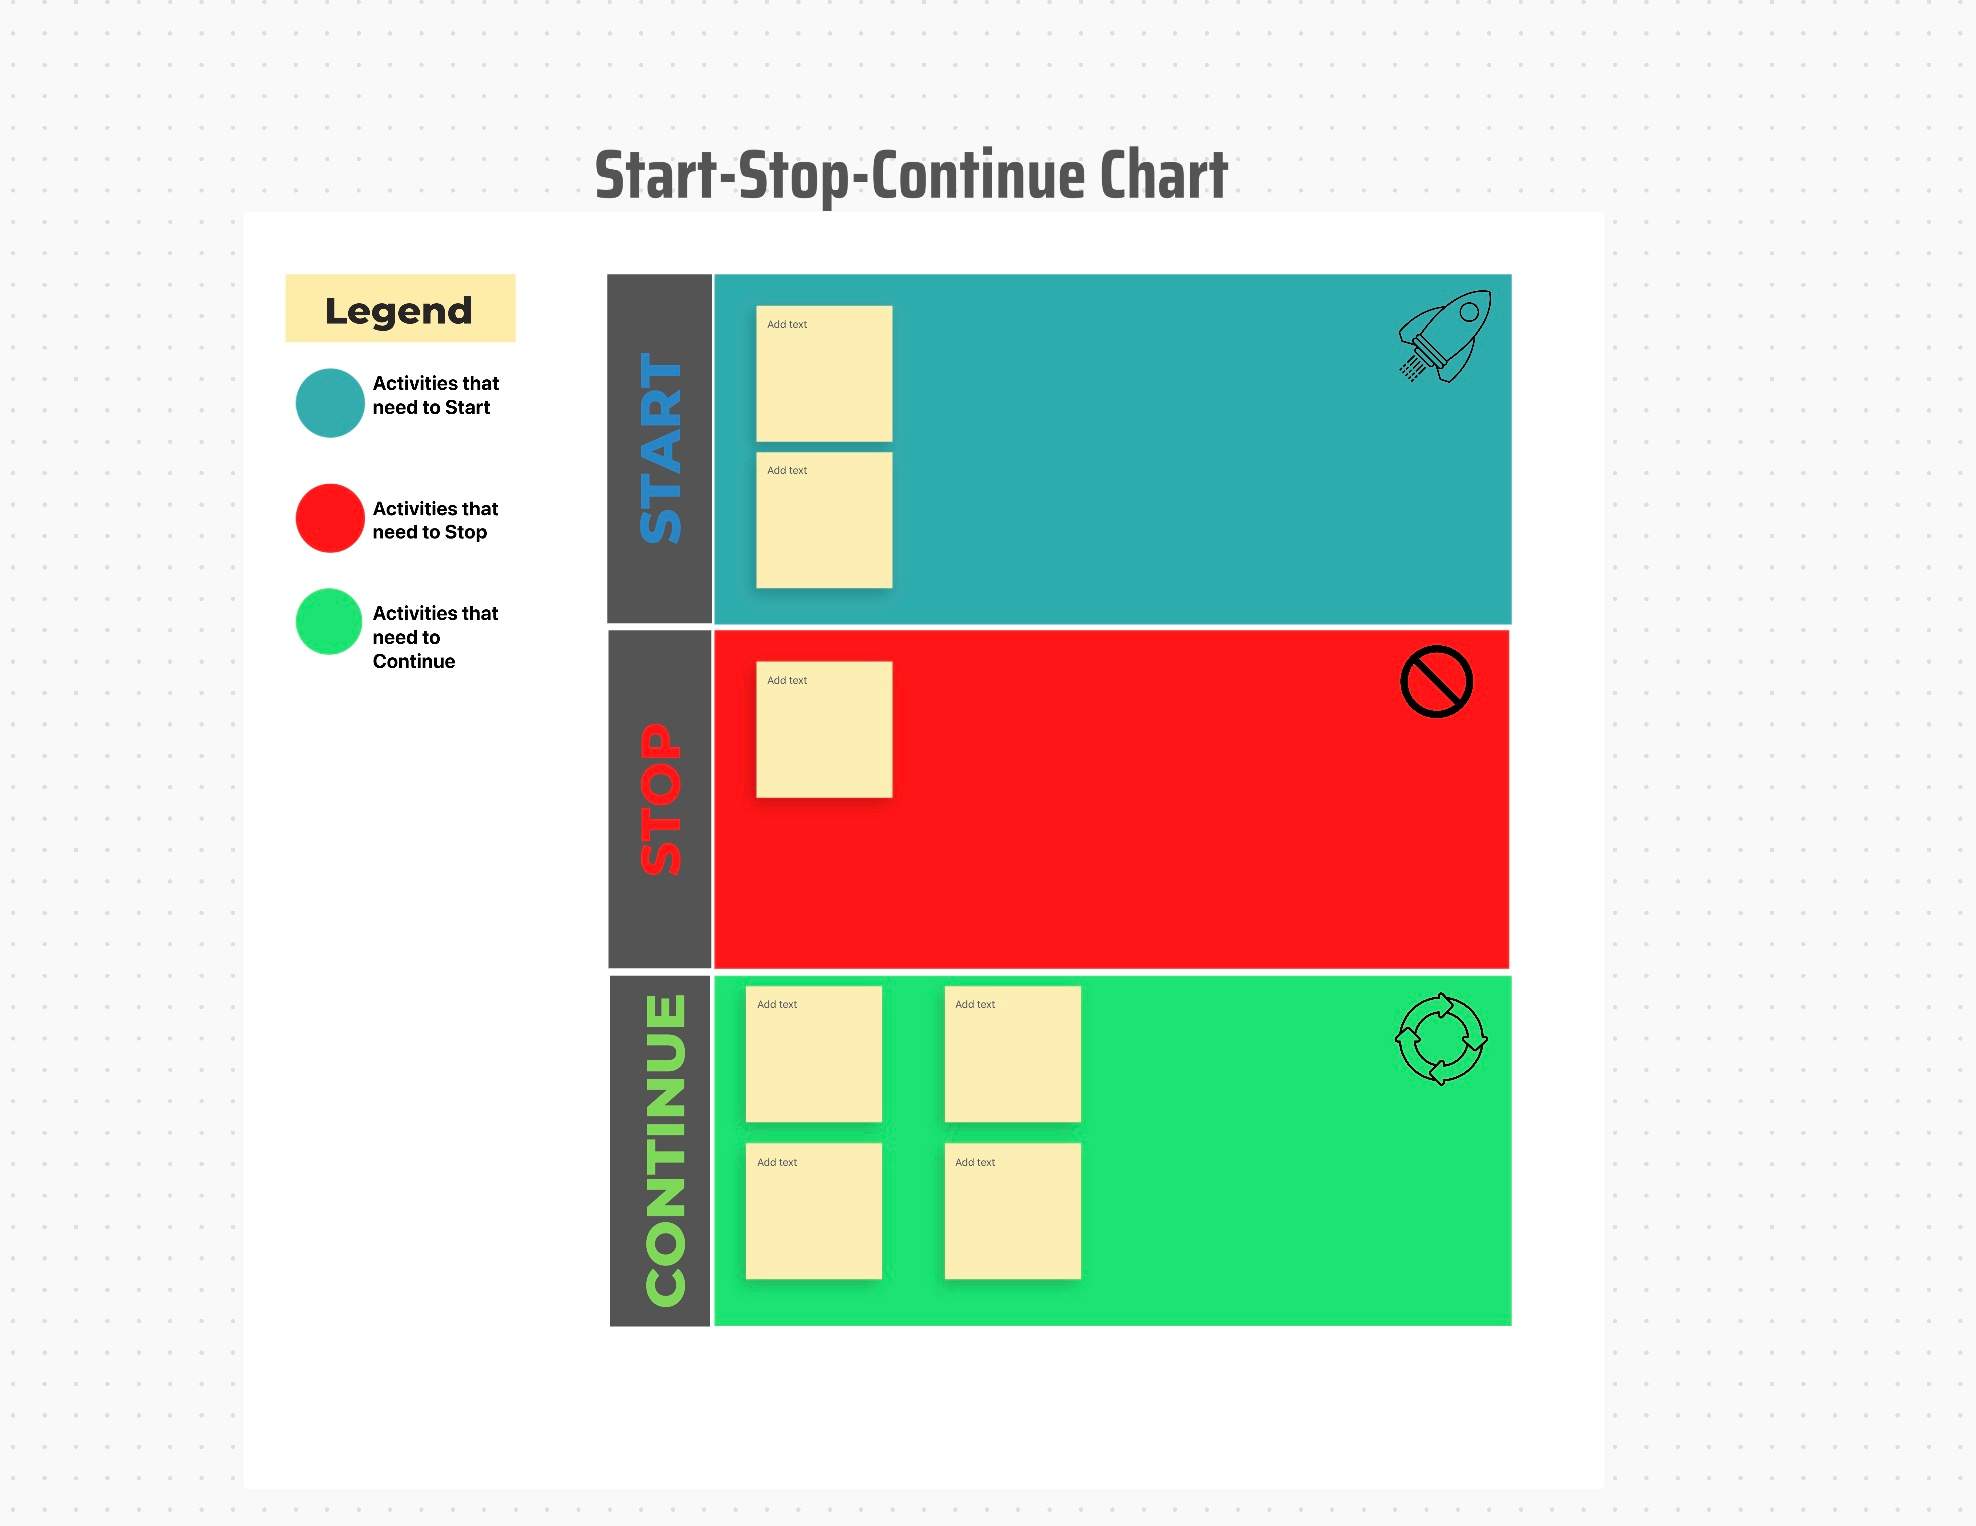 Start, Stop, Continue chart is a visual tool that helps the user reflect on the current tasks or activities. It gives an overall view on the experience and/or feedback.